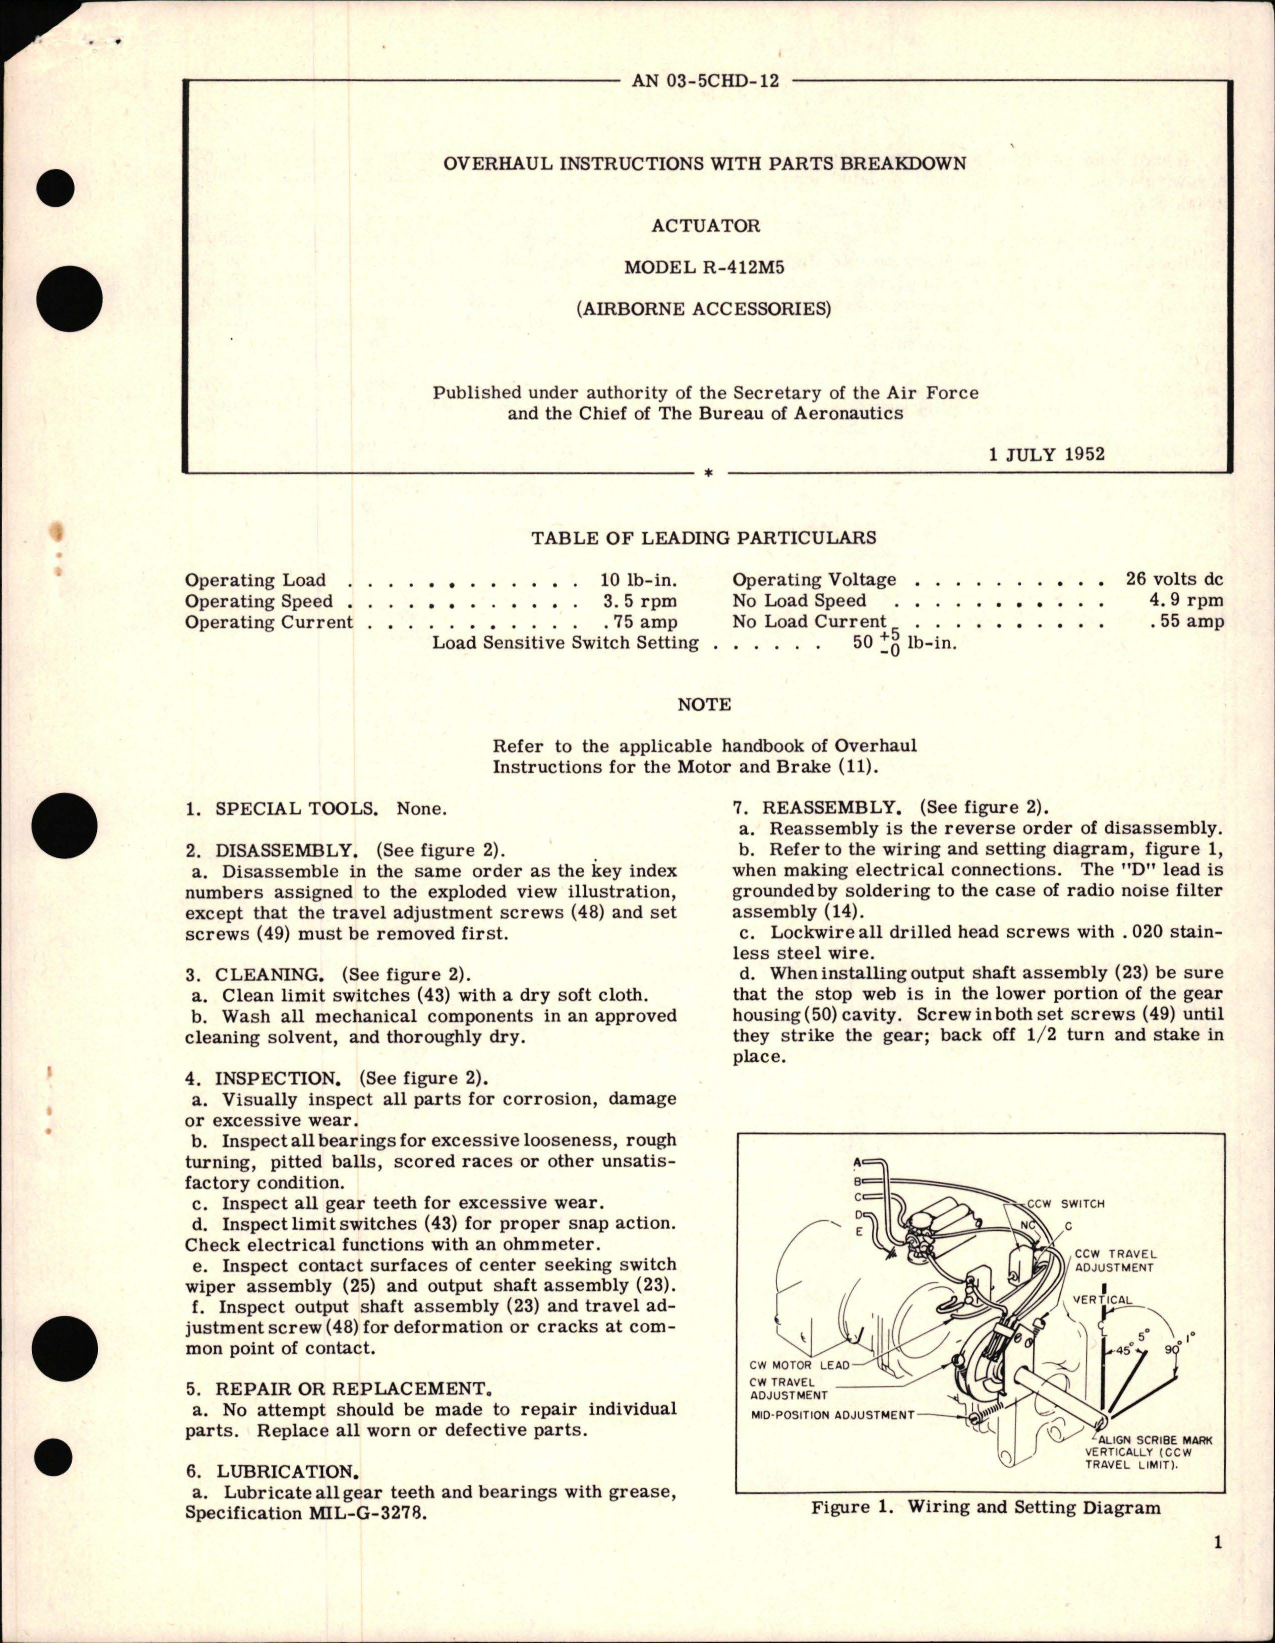 Sample page 1 from AirCorps Library document: Overhaul Instructions with Parts Breakdown for Actuator Model R-412M5